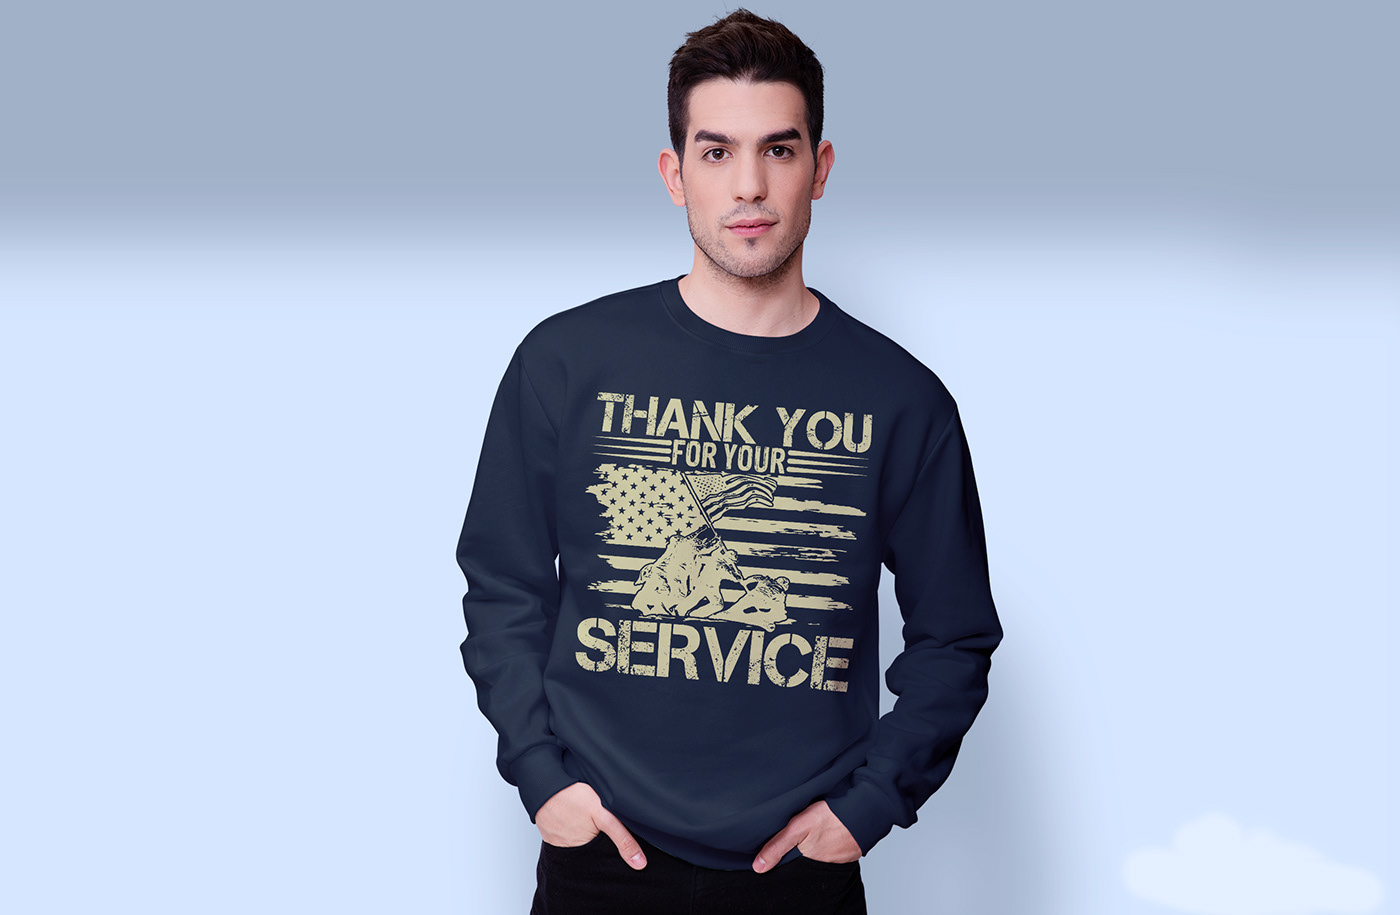 army Military soldier T-SHIRT AMAZON US ARMY Veteran T-Shirt Veteran T-Shirt Design veteran t-shirts Veteran T-Shirts Design Veterans Day